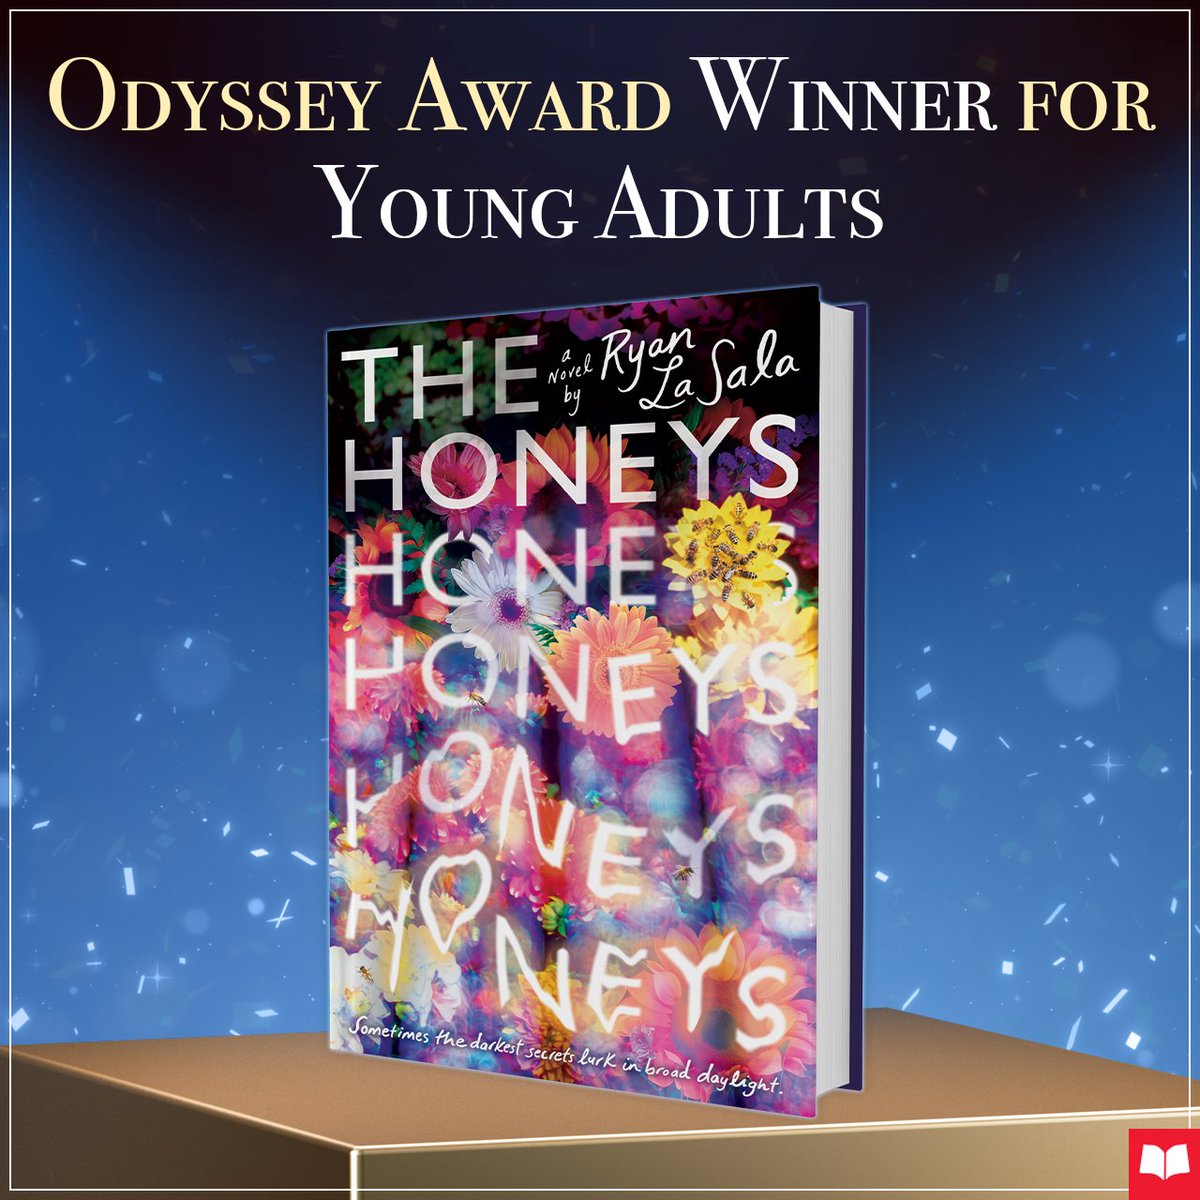 Odyssey Award Winner for Young Adults
The Honeys by Ryan La Sala (@theryanlasala); Narrated by Pete Cross (@thepetecross)